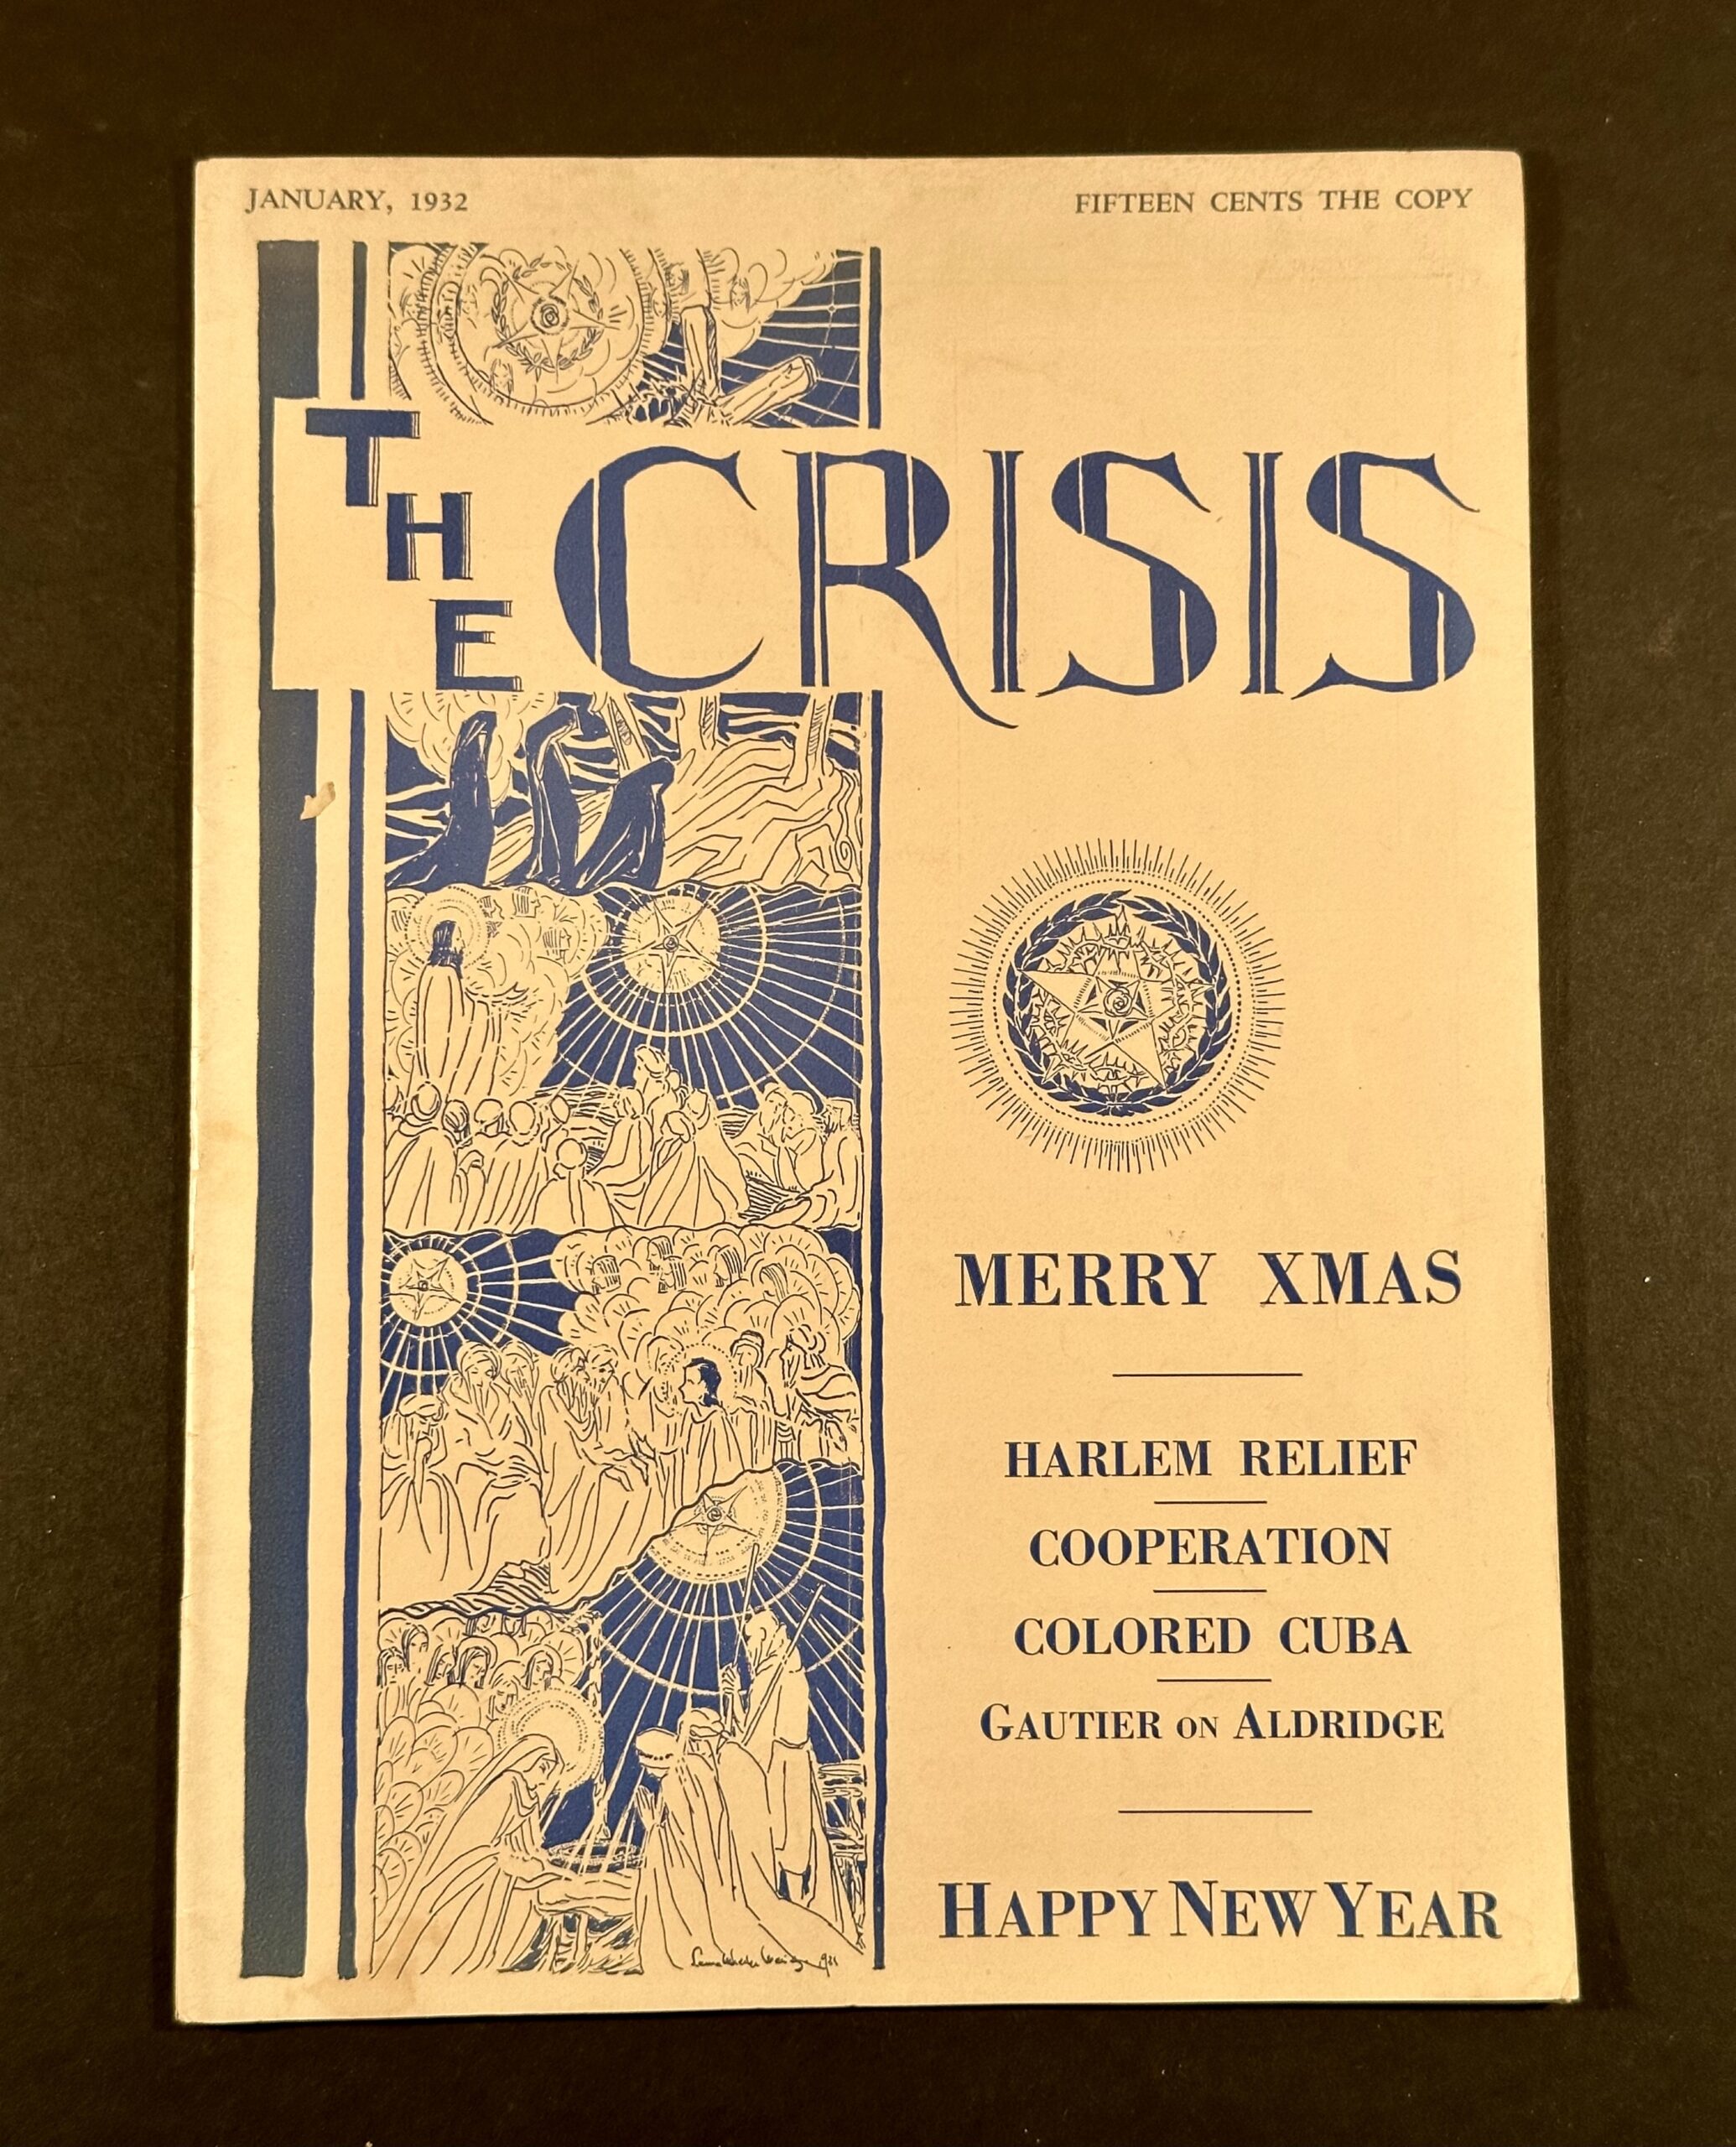 Dubois, W.E.B. The Crisis, [January 1932], from the Alice Dunbar Nelson Papers collection